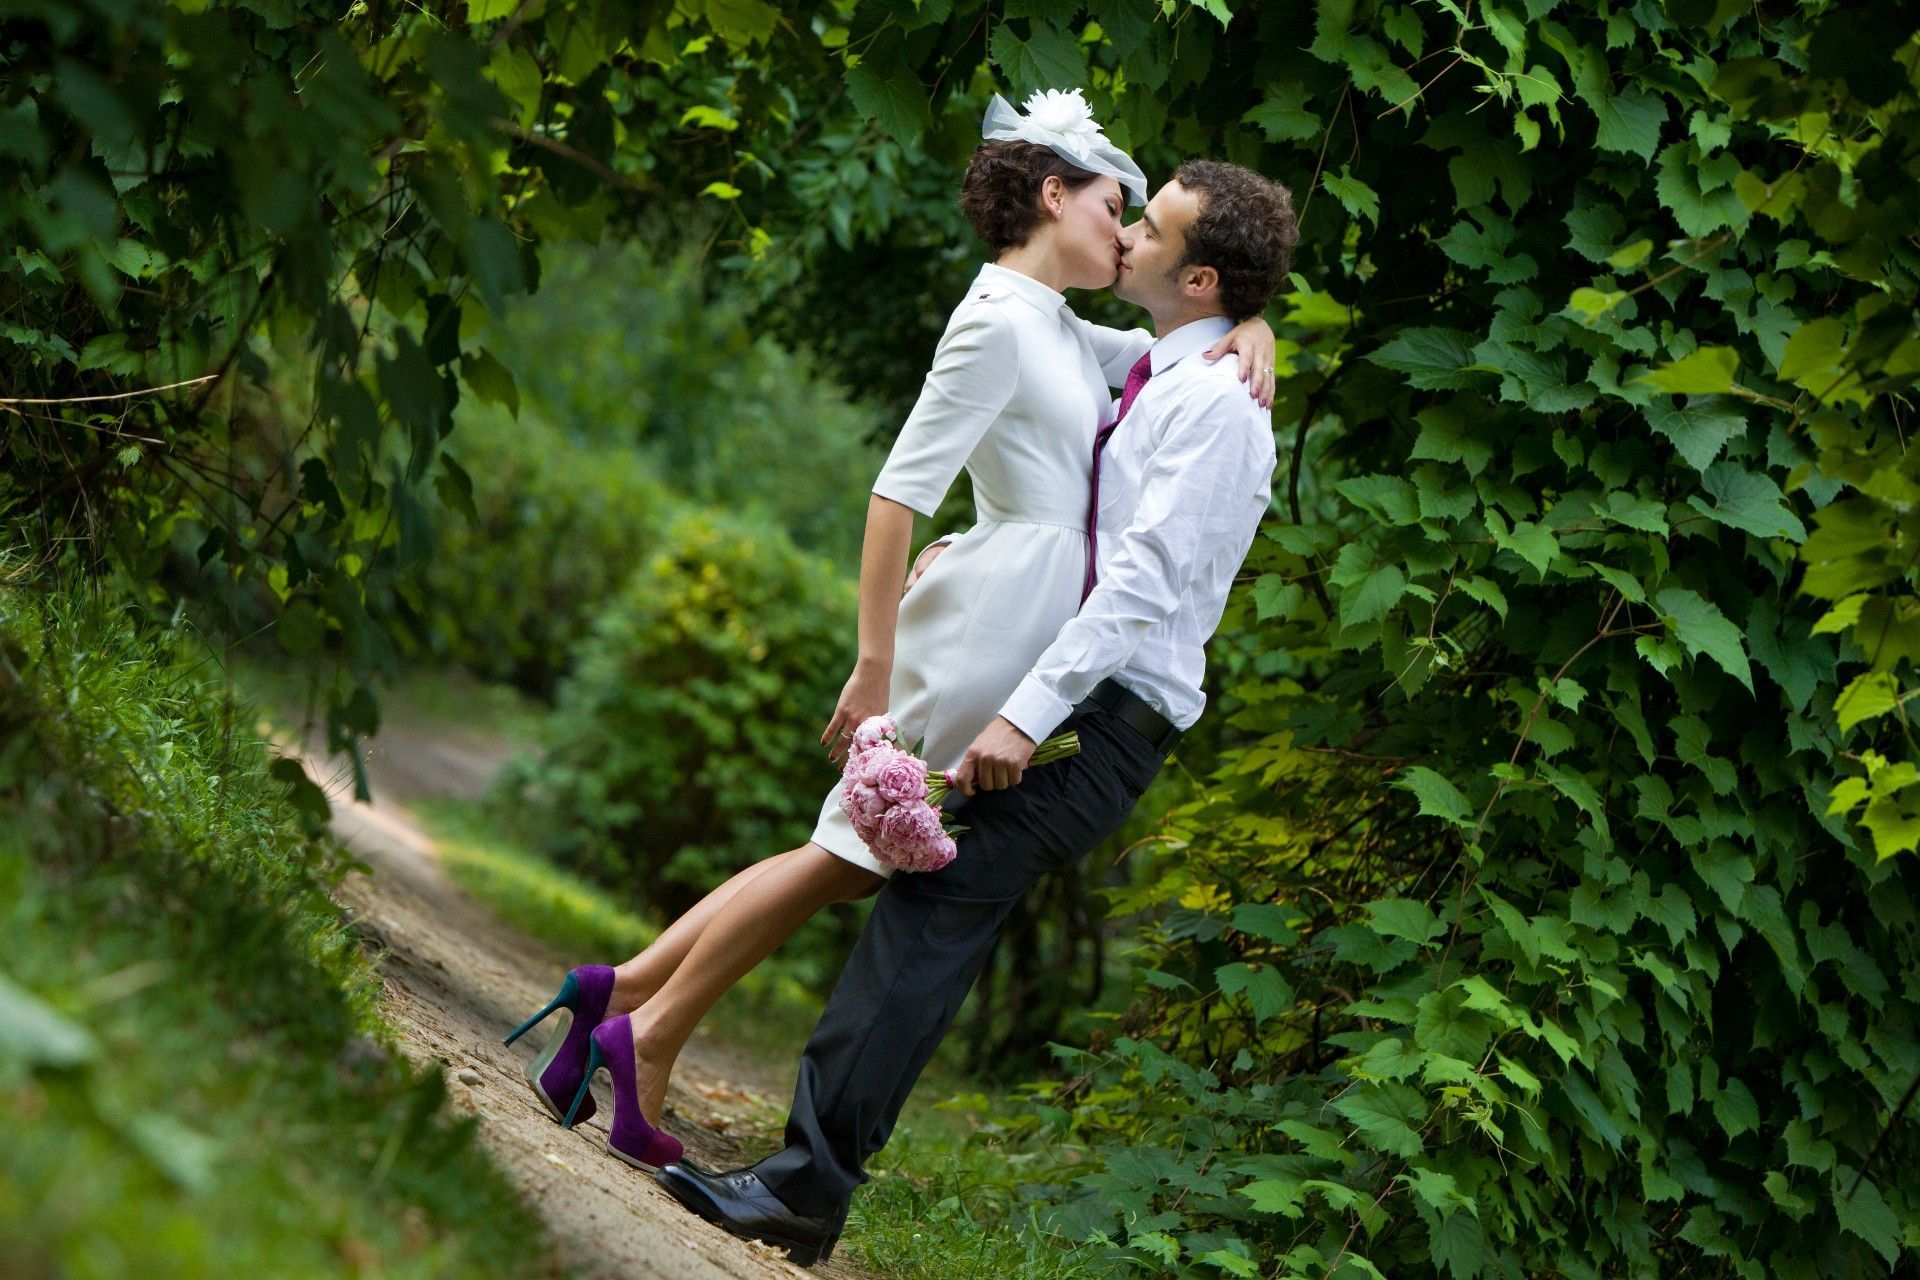 Bride and groom sharing a kiss to symbolize their union as husband and wife